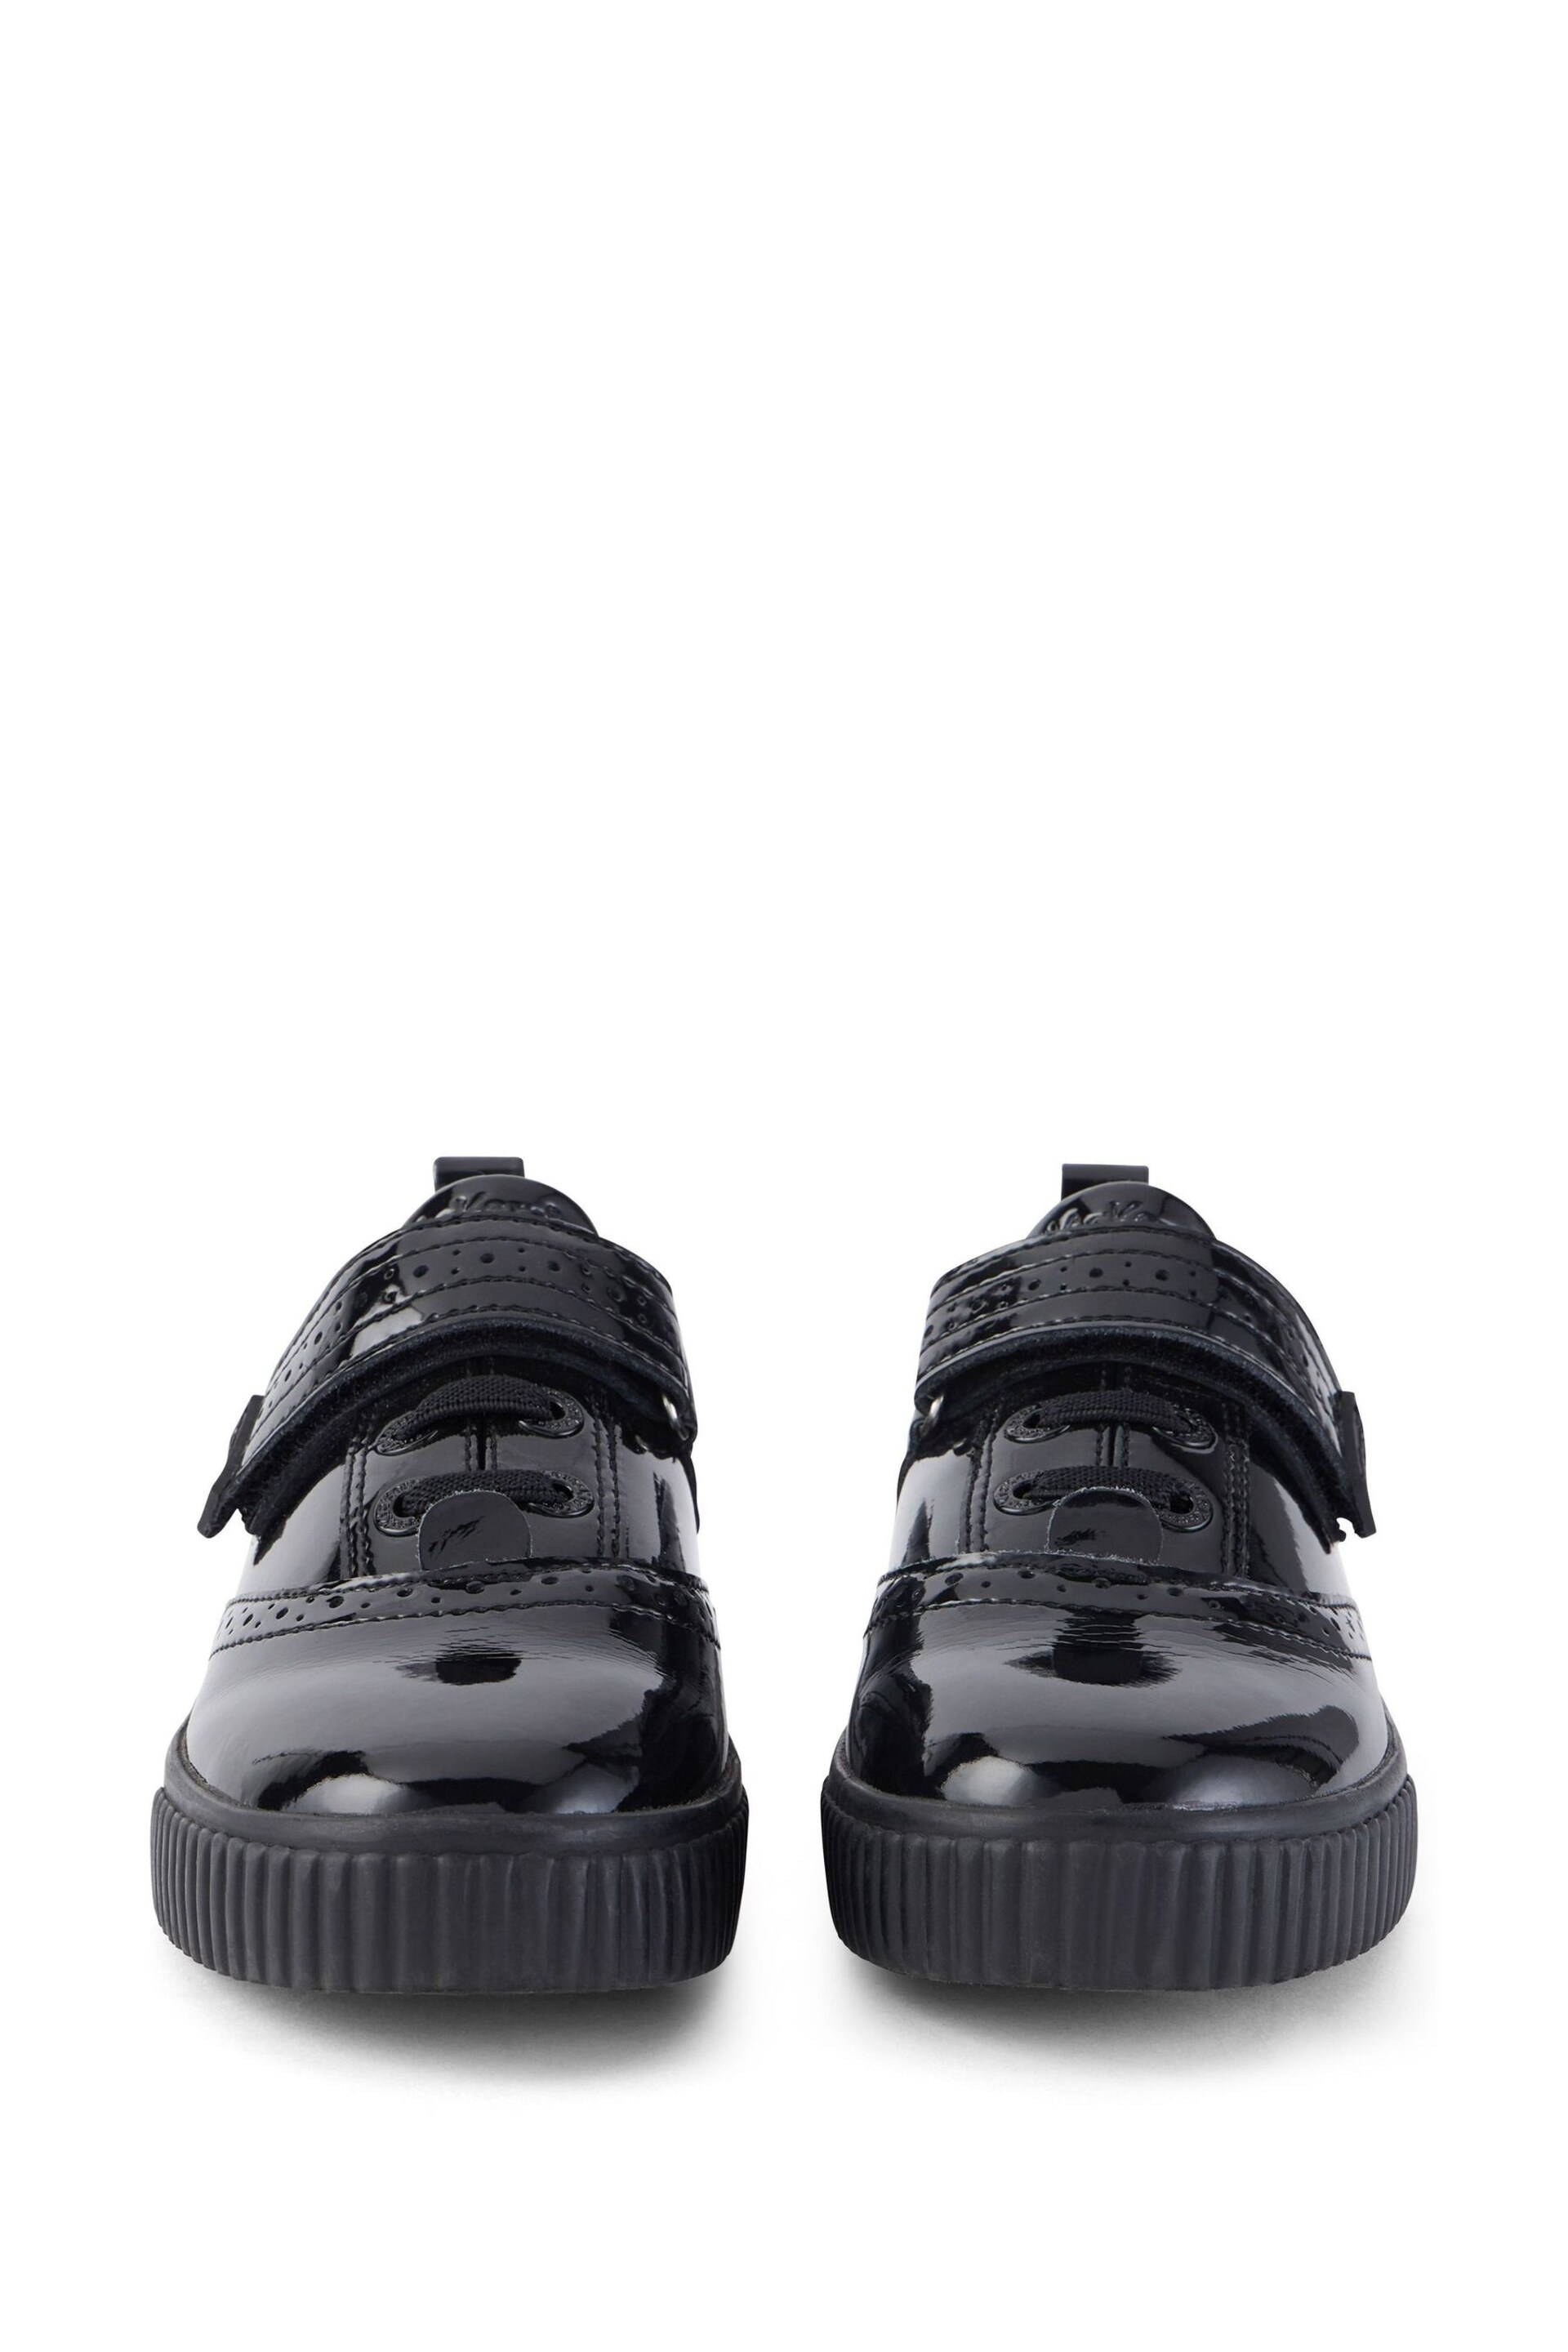 Kickers Junior Tovni Brogue Patent Leather Shoes - Image 2 of 6